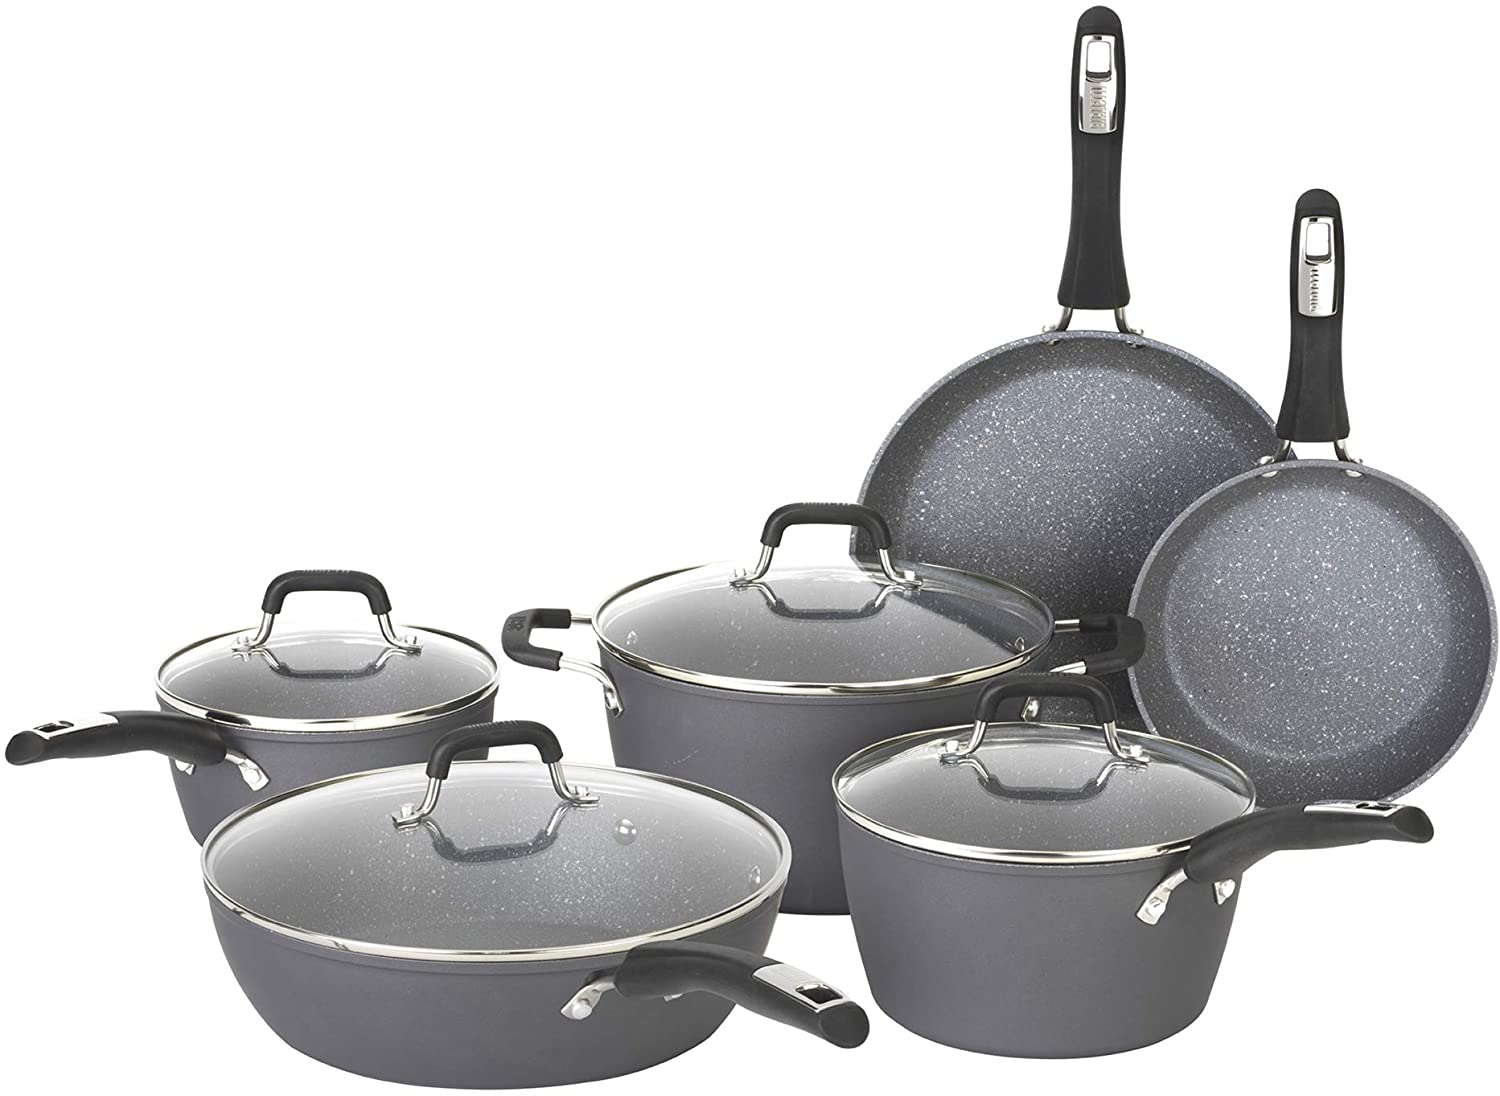 Bialetti 10 Piece Pots and Pans